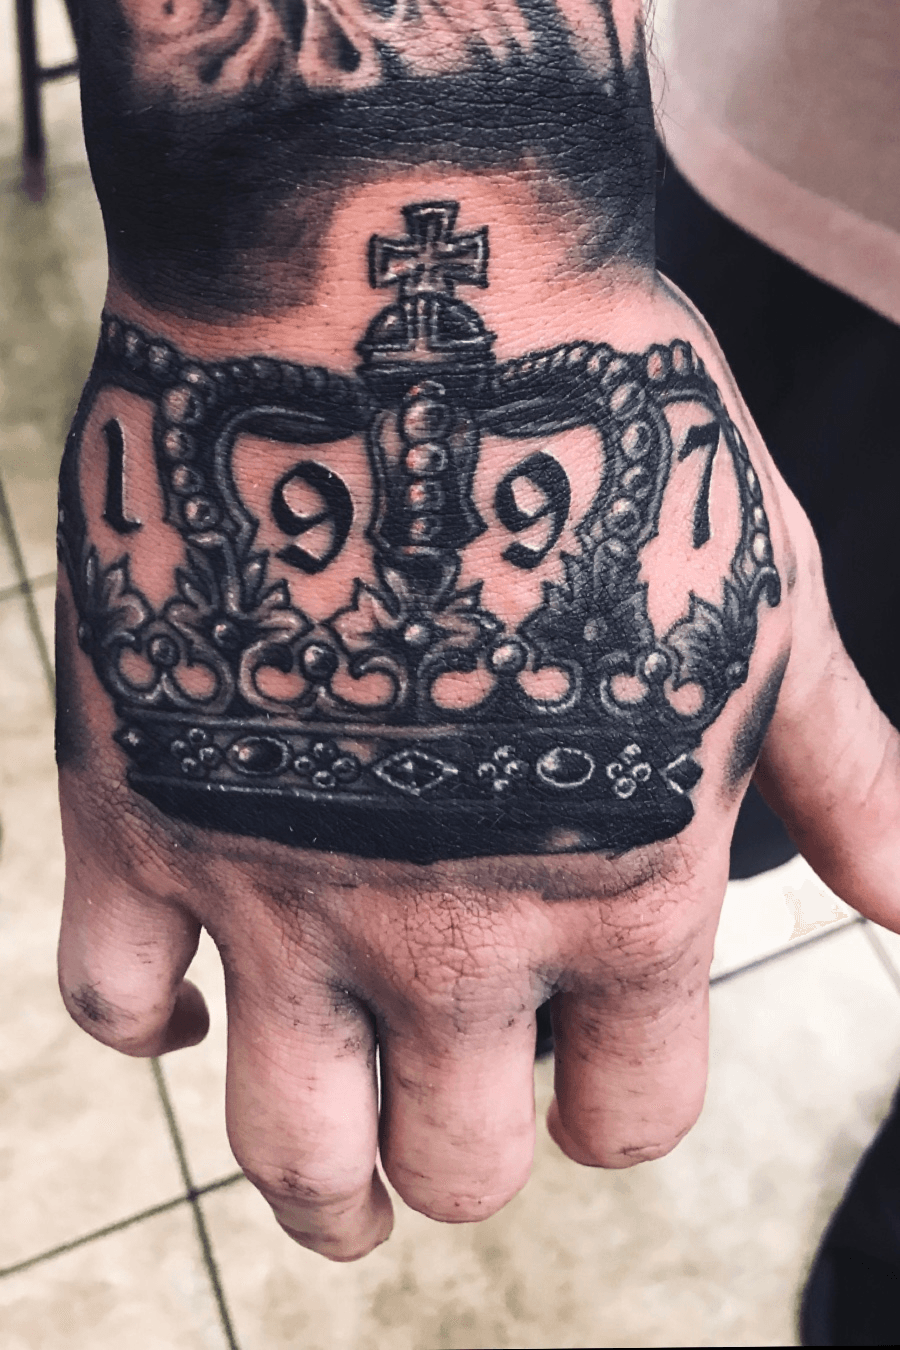 Tattoo uploaded by anthonysanchez33 • 90's baby crown hand tattoo by Ruben barba at Authentic roots in Long Beach,Ca #handtattoo #crowntattoo #crown #1997 • Tattoodo